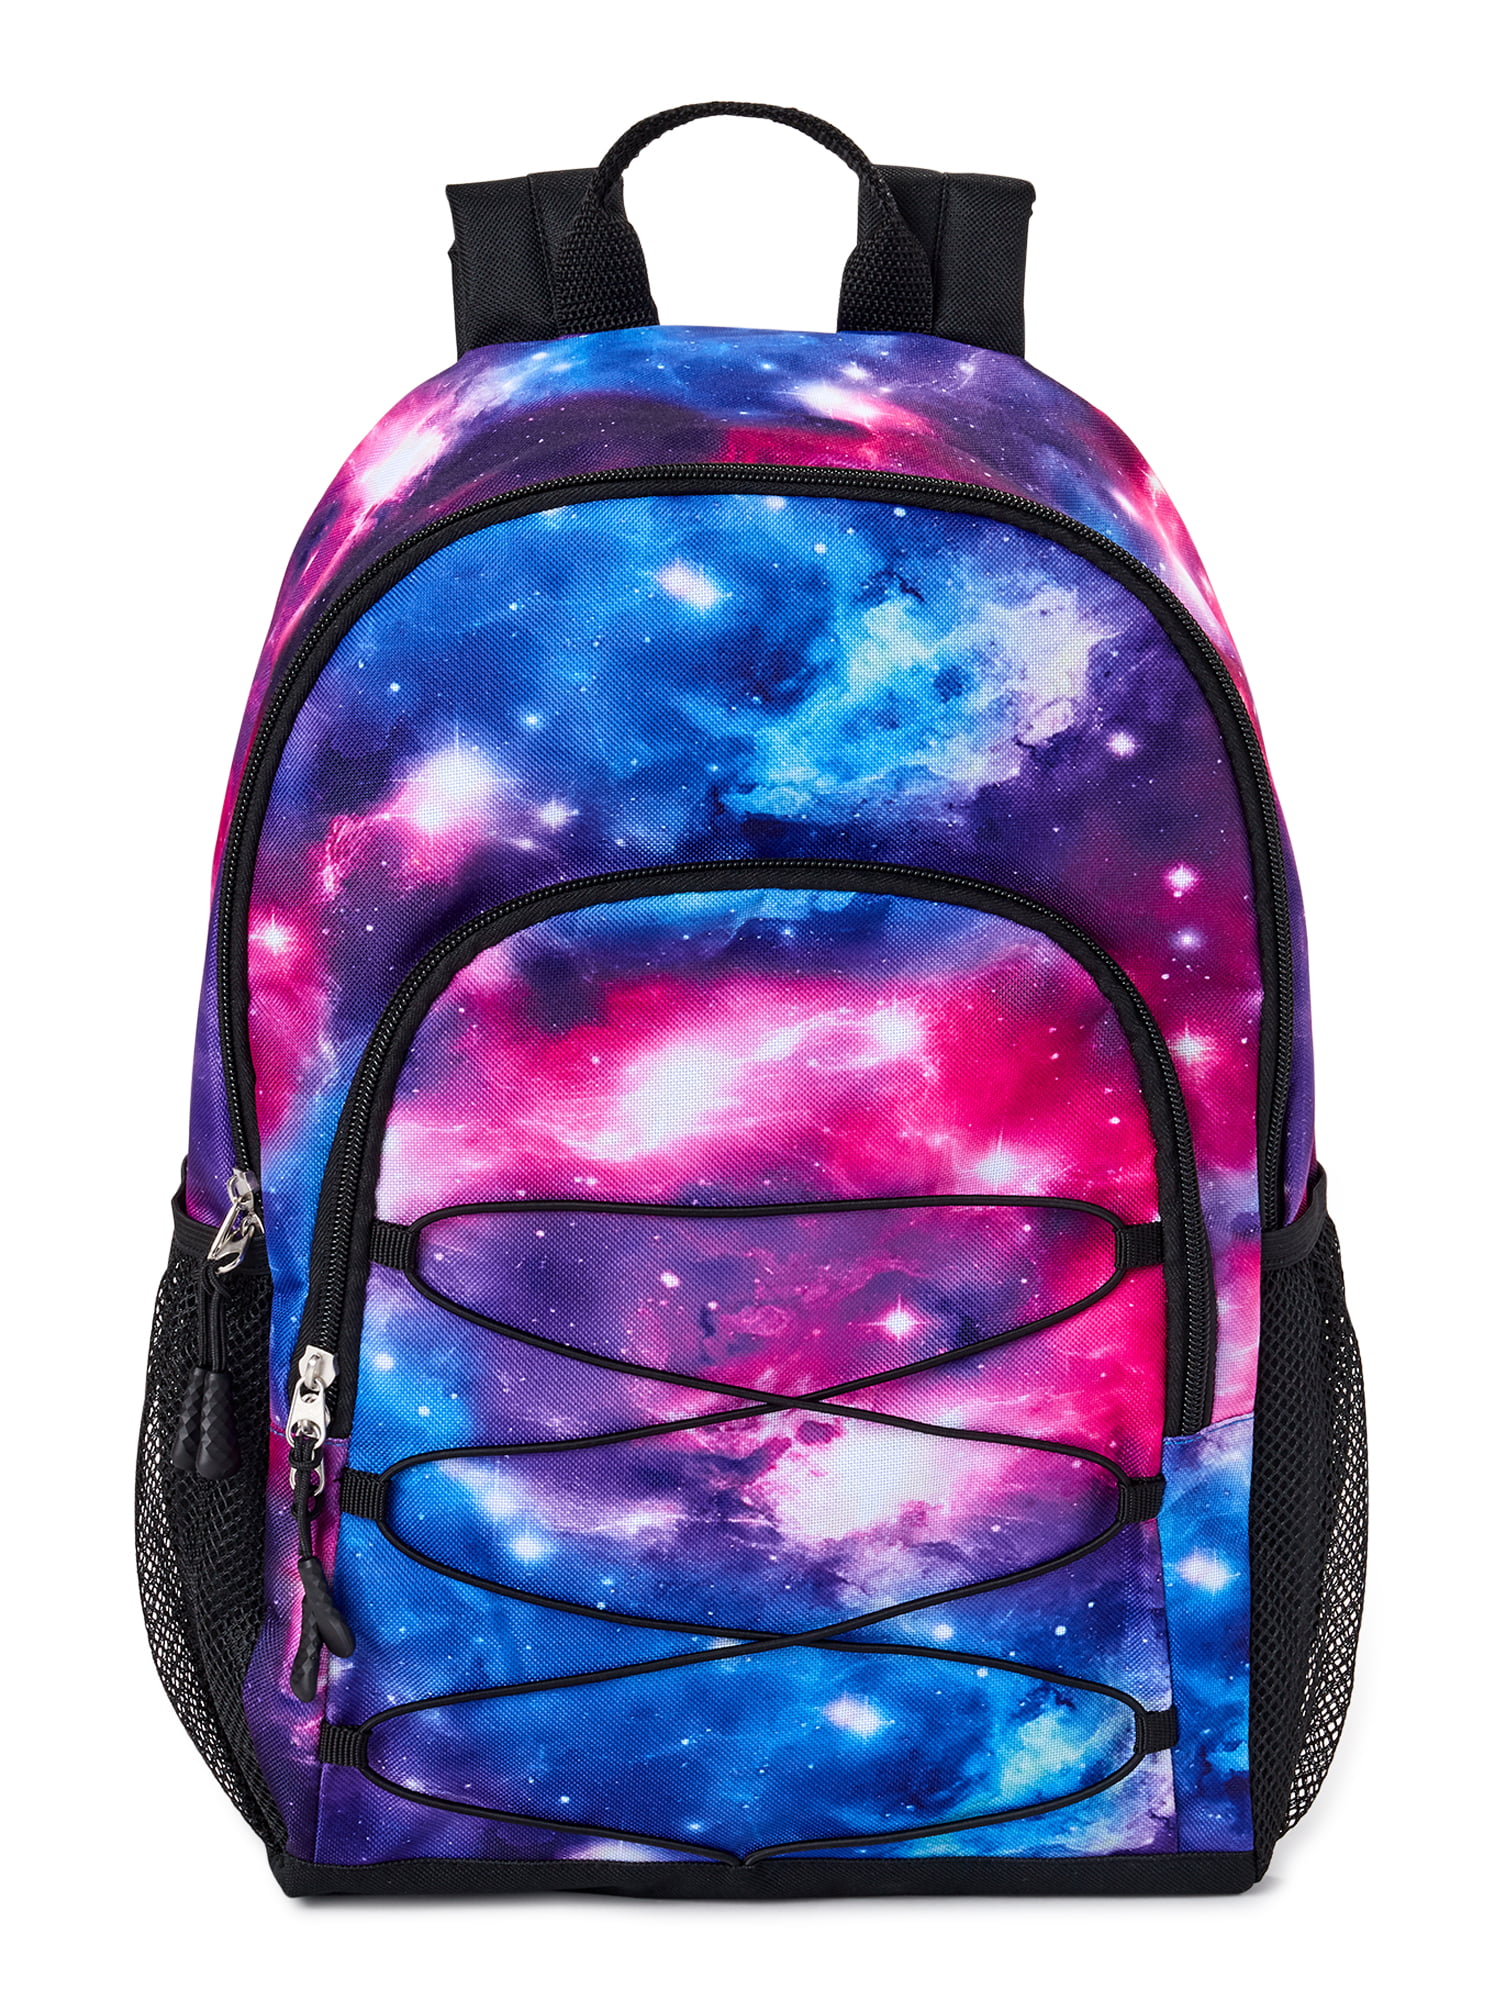 Backpack For Kid School Backpacks for Teens Boys and Girls 16inch Galaxy